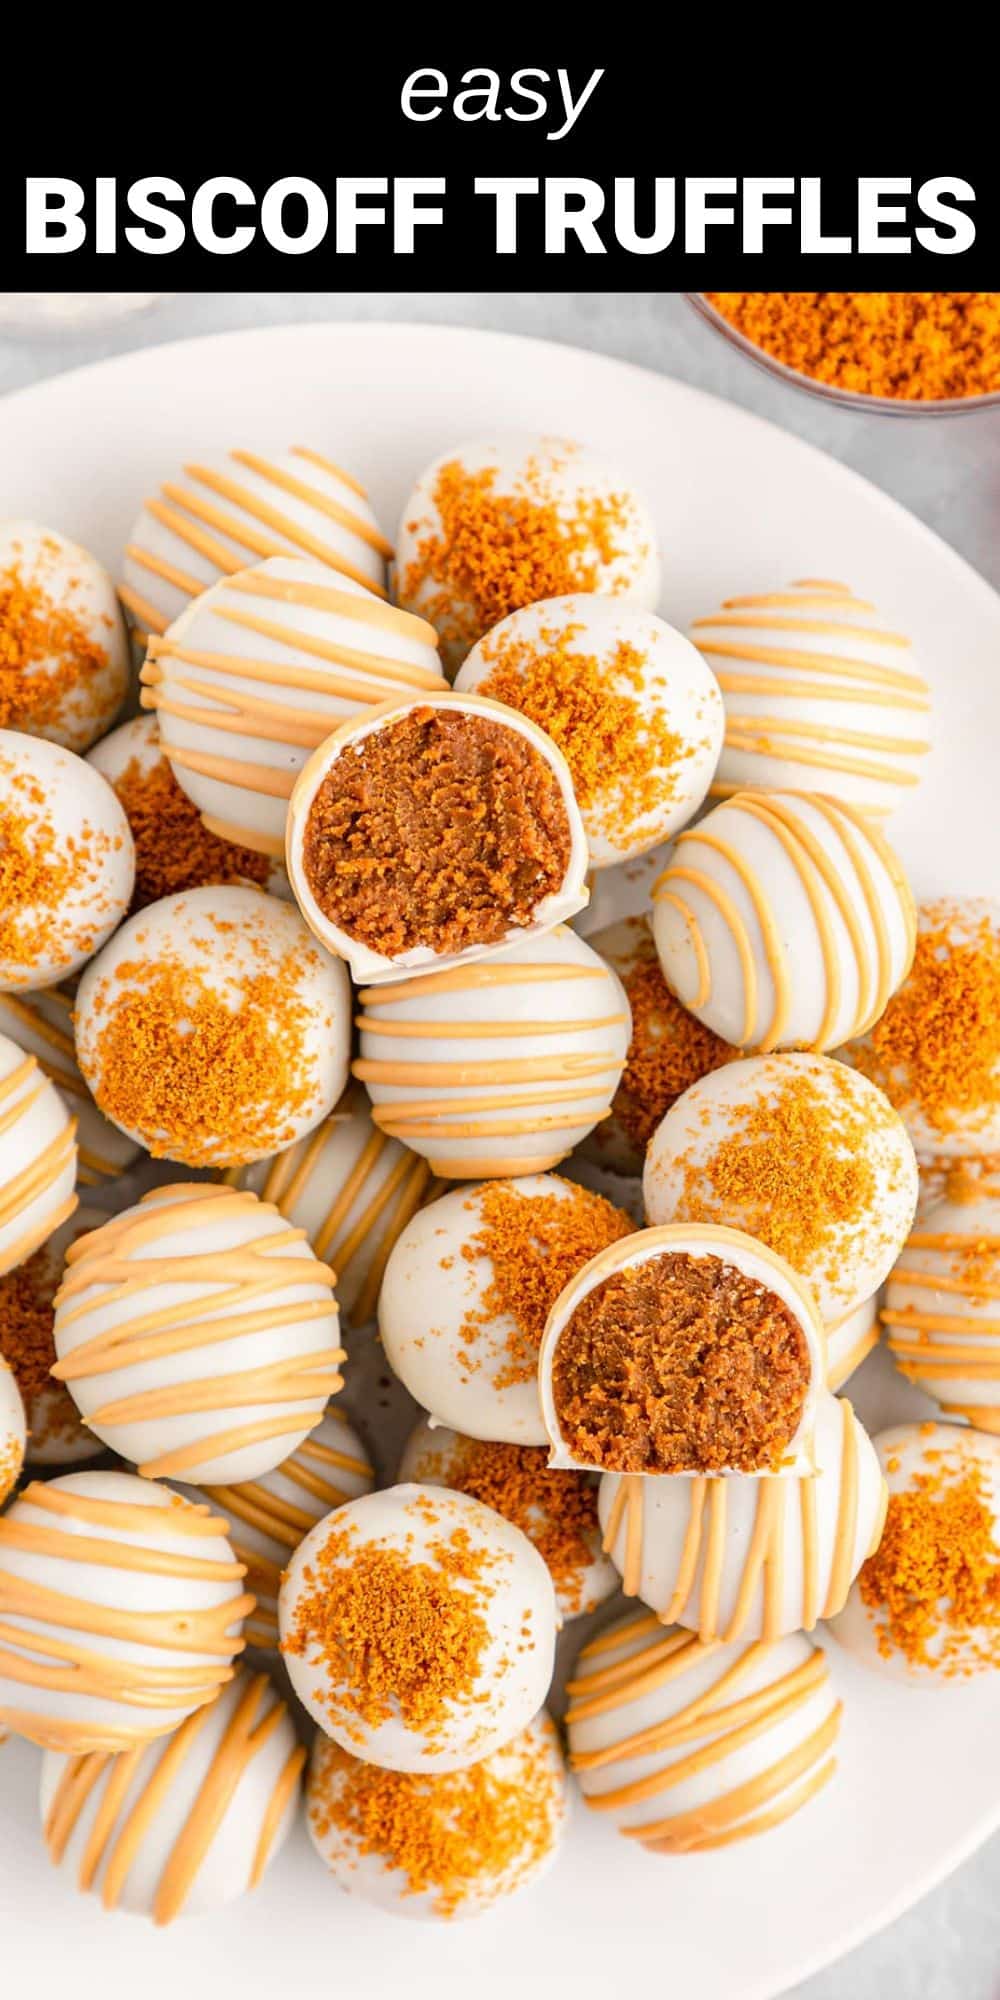 These easy to make Biscoff Truffles are decadent, no bake treats that combine an irresistible creamy Biscoff cookies center with a white chocolate coating. They're the perfect bite-sized dessert for any occasion. 